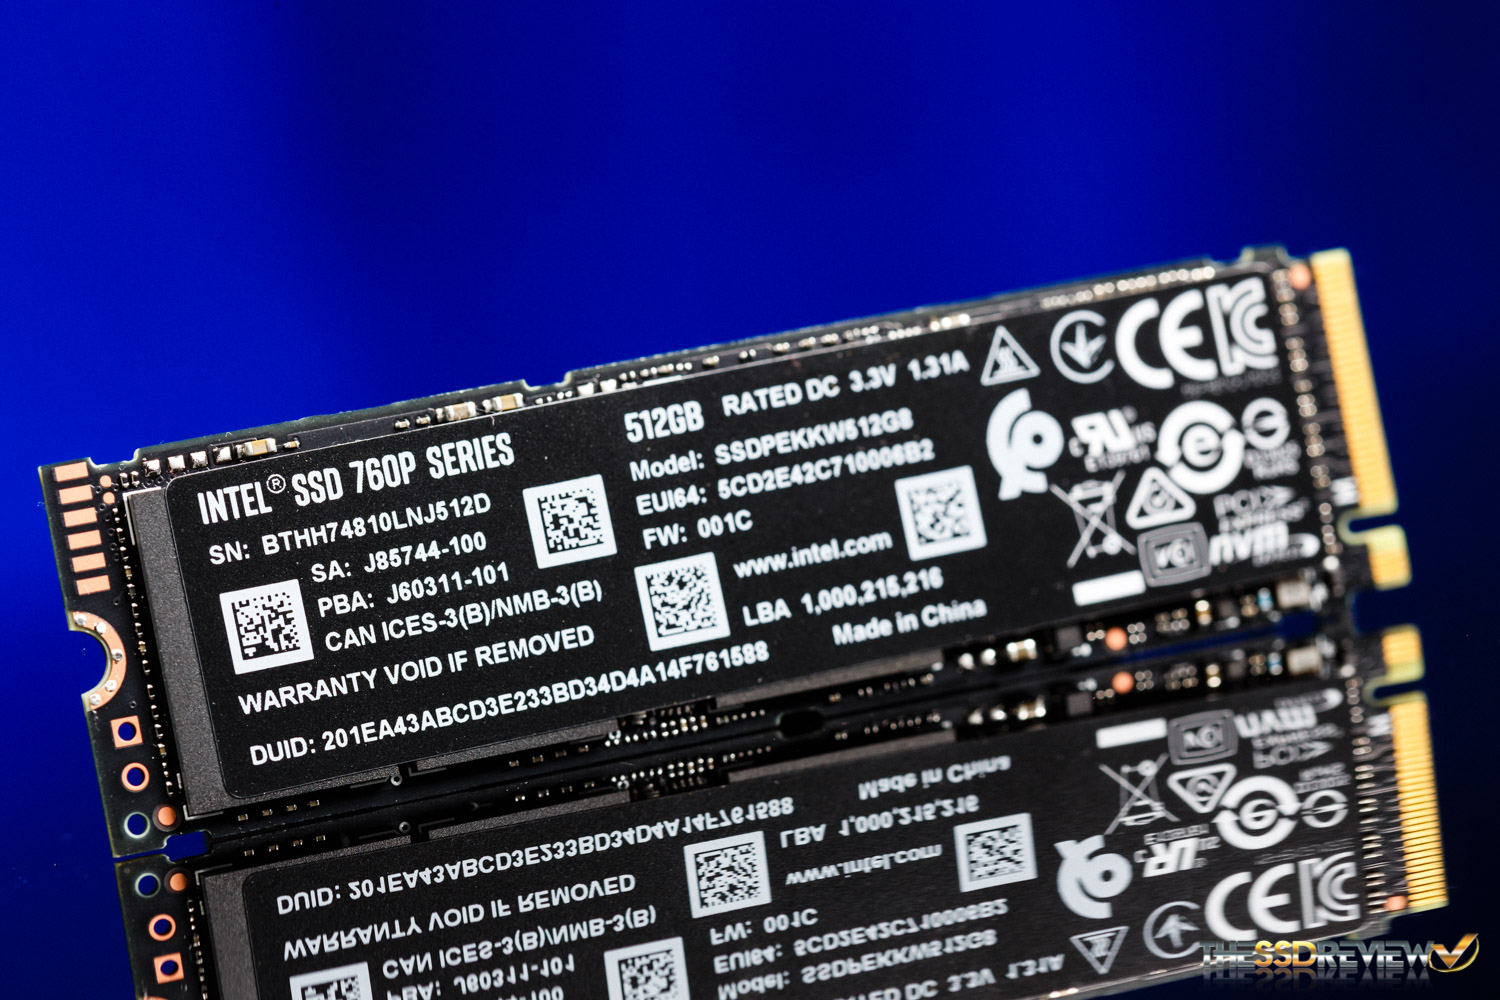 End Wardian case trembling Intel SSD 760P M.2 NVMe SSD Review (512GB) | The SSD Review